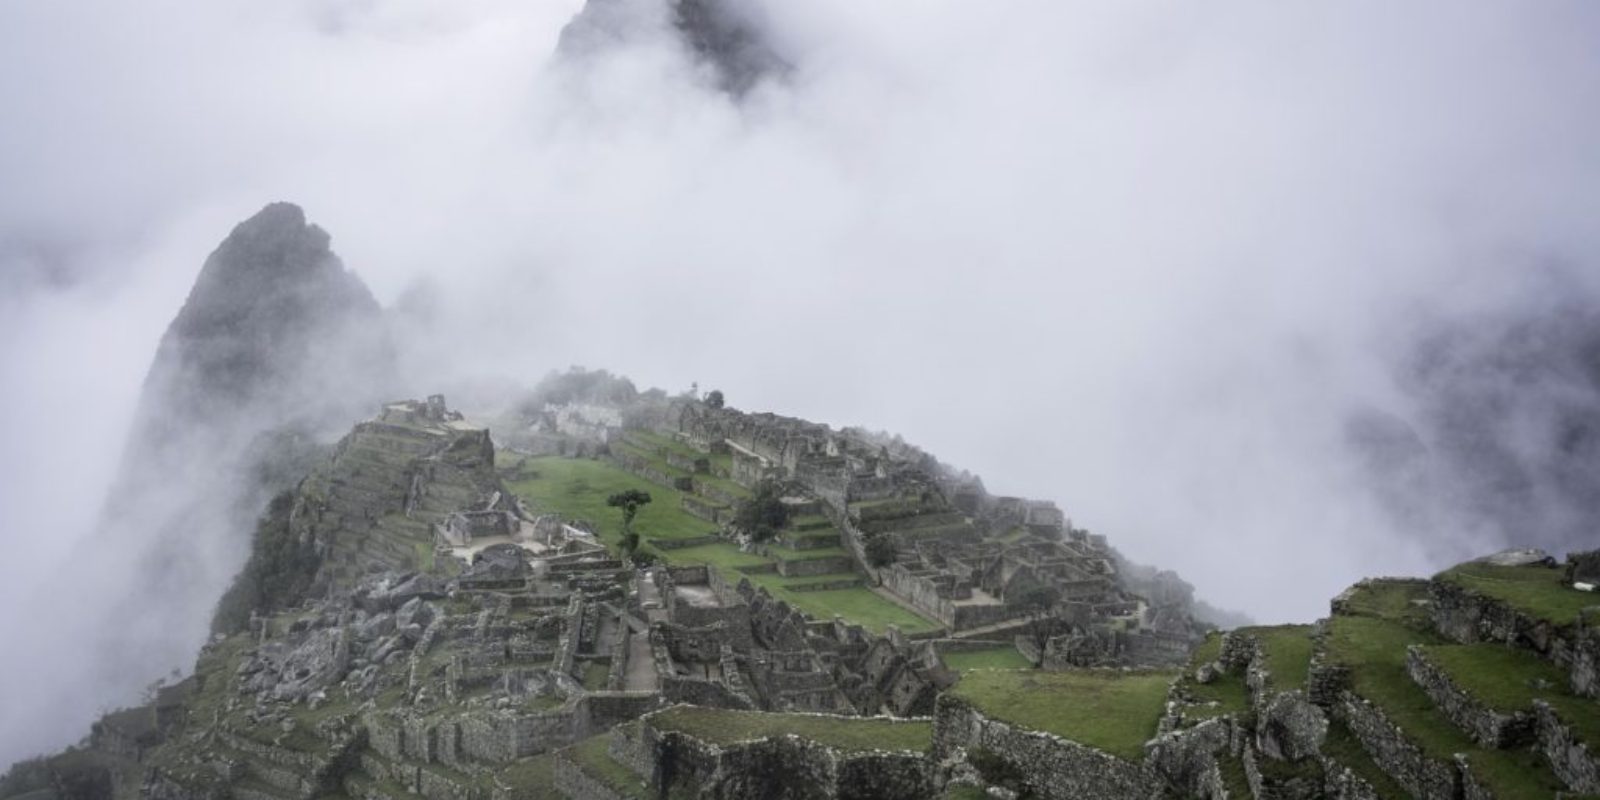 Peru's Sacred Valley is home to Machu Picchu - its most famous site - as well as Ollantaytambo, Salinas, and Moray. These archaeological ruins are best...